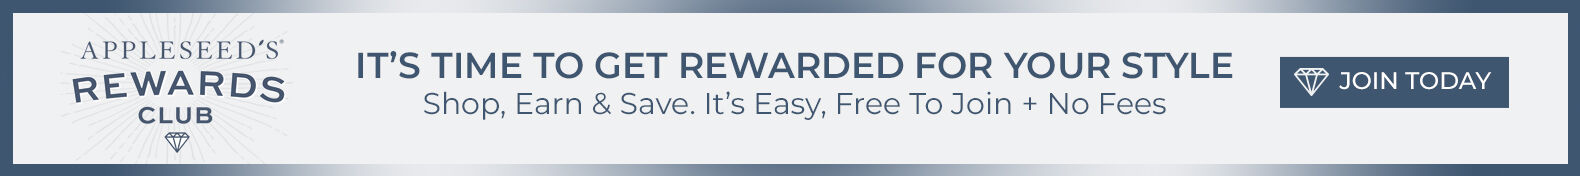 appleseed's rewards club it's time to get rewarded for your style shop, earn & save it's easy, free to join + no fees join today